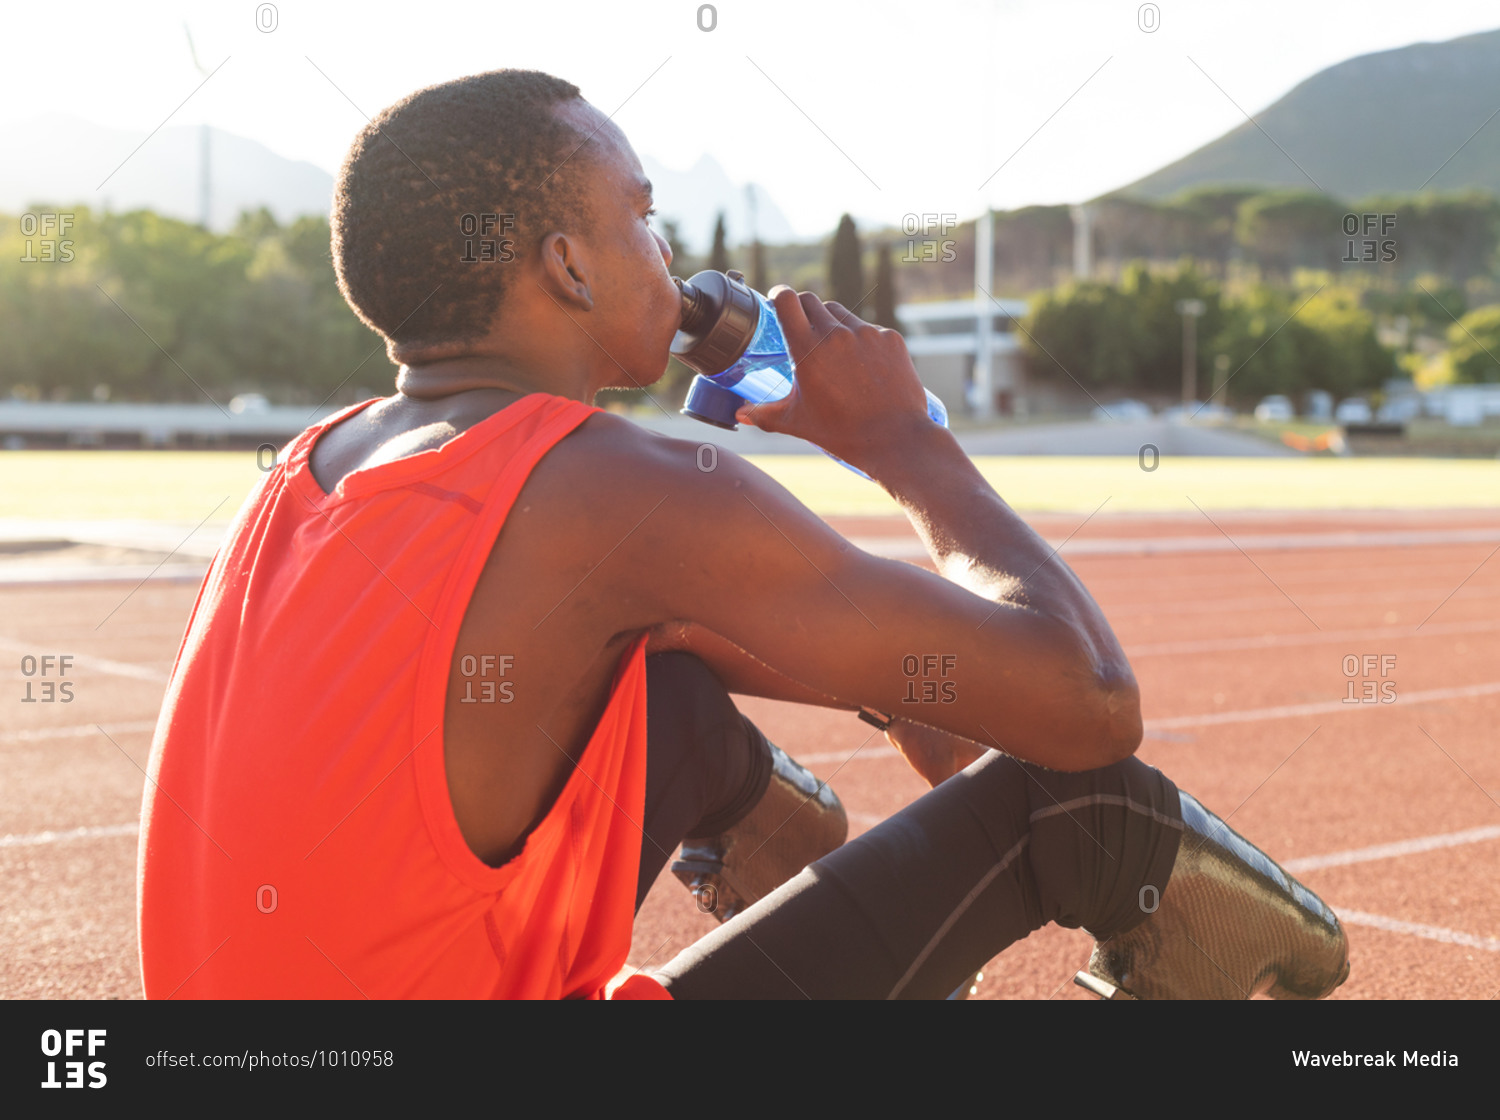 Fit, mixed race disabled male athlete at an outdoor sports stadium, resting and drinking from water bottle on race track wearing running blades. Disability athletics sport training.